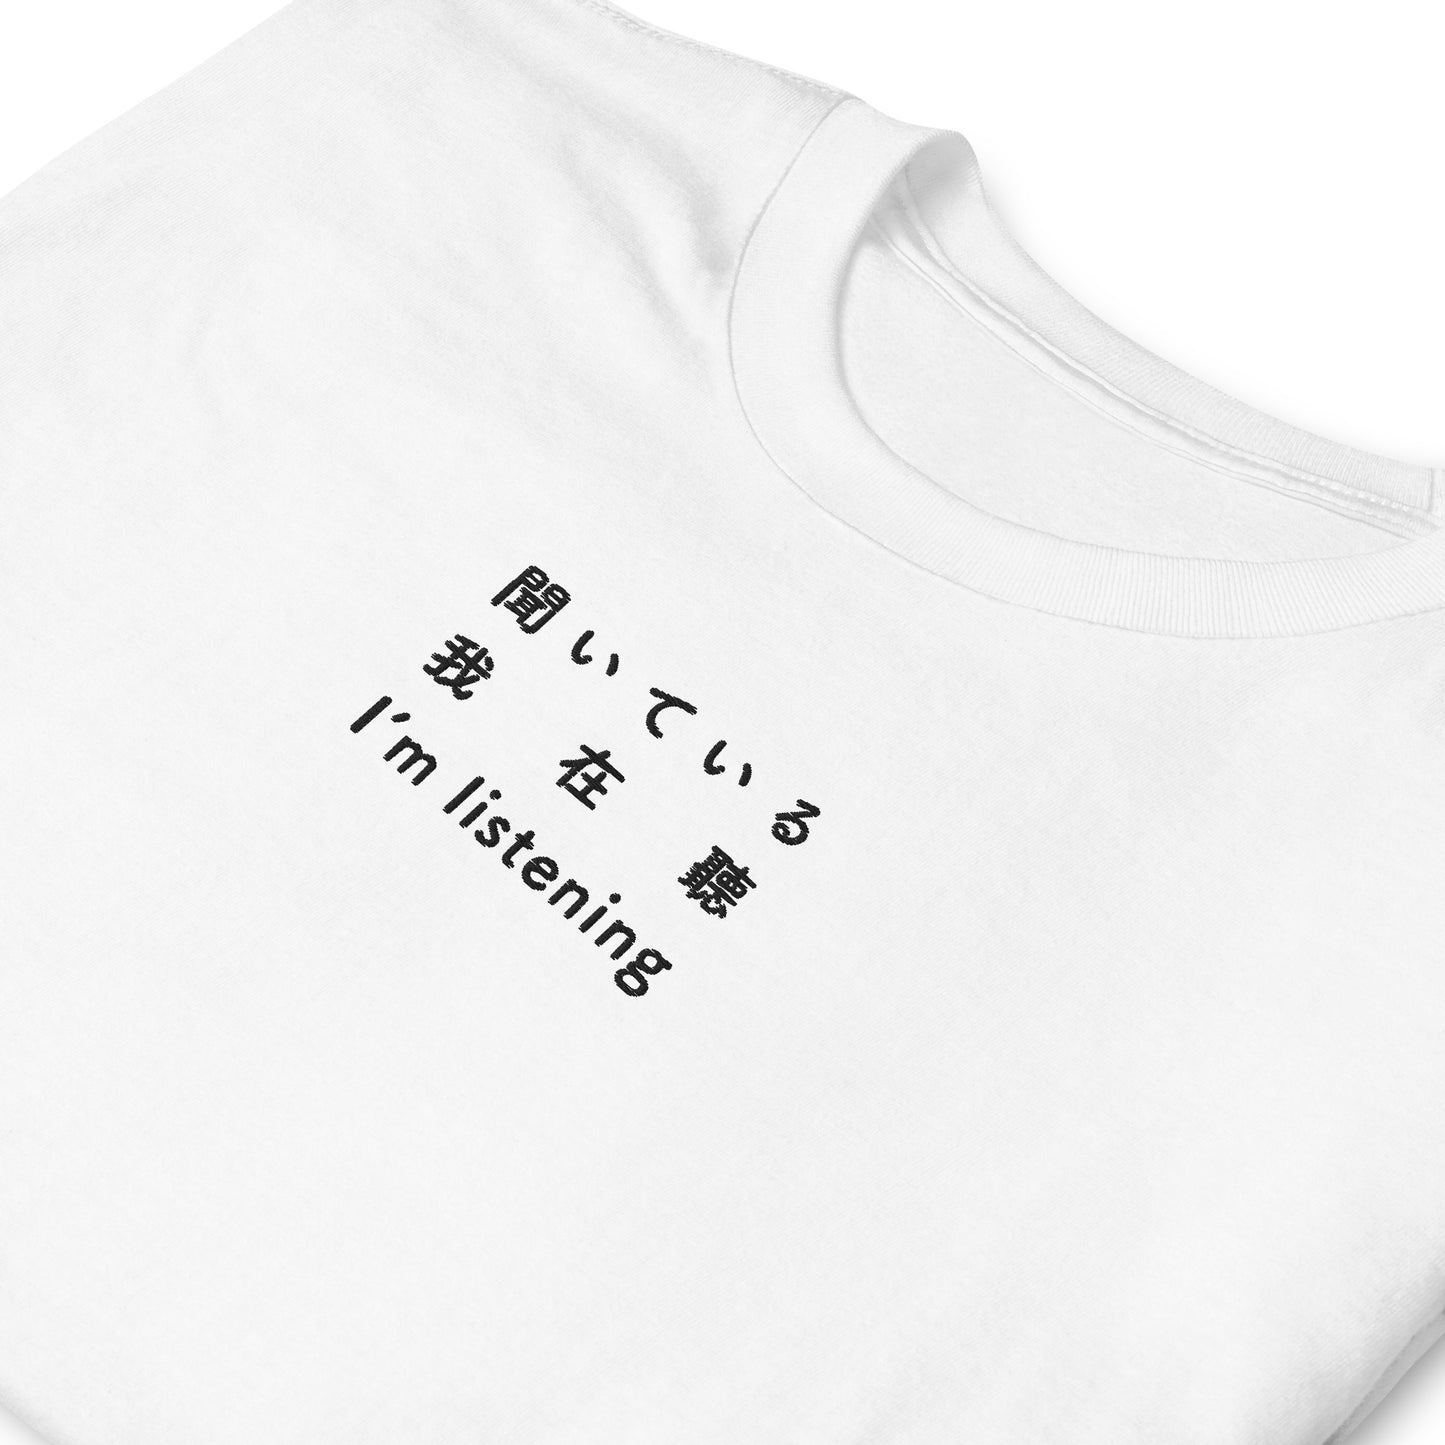 White High Quality Tee - Front Design with an Black Embroidery "I'm listening" in Japanese,Chinese and English